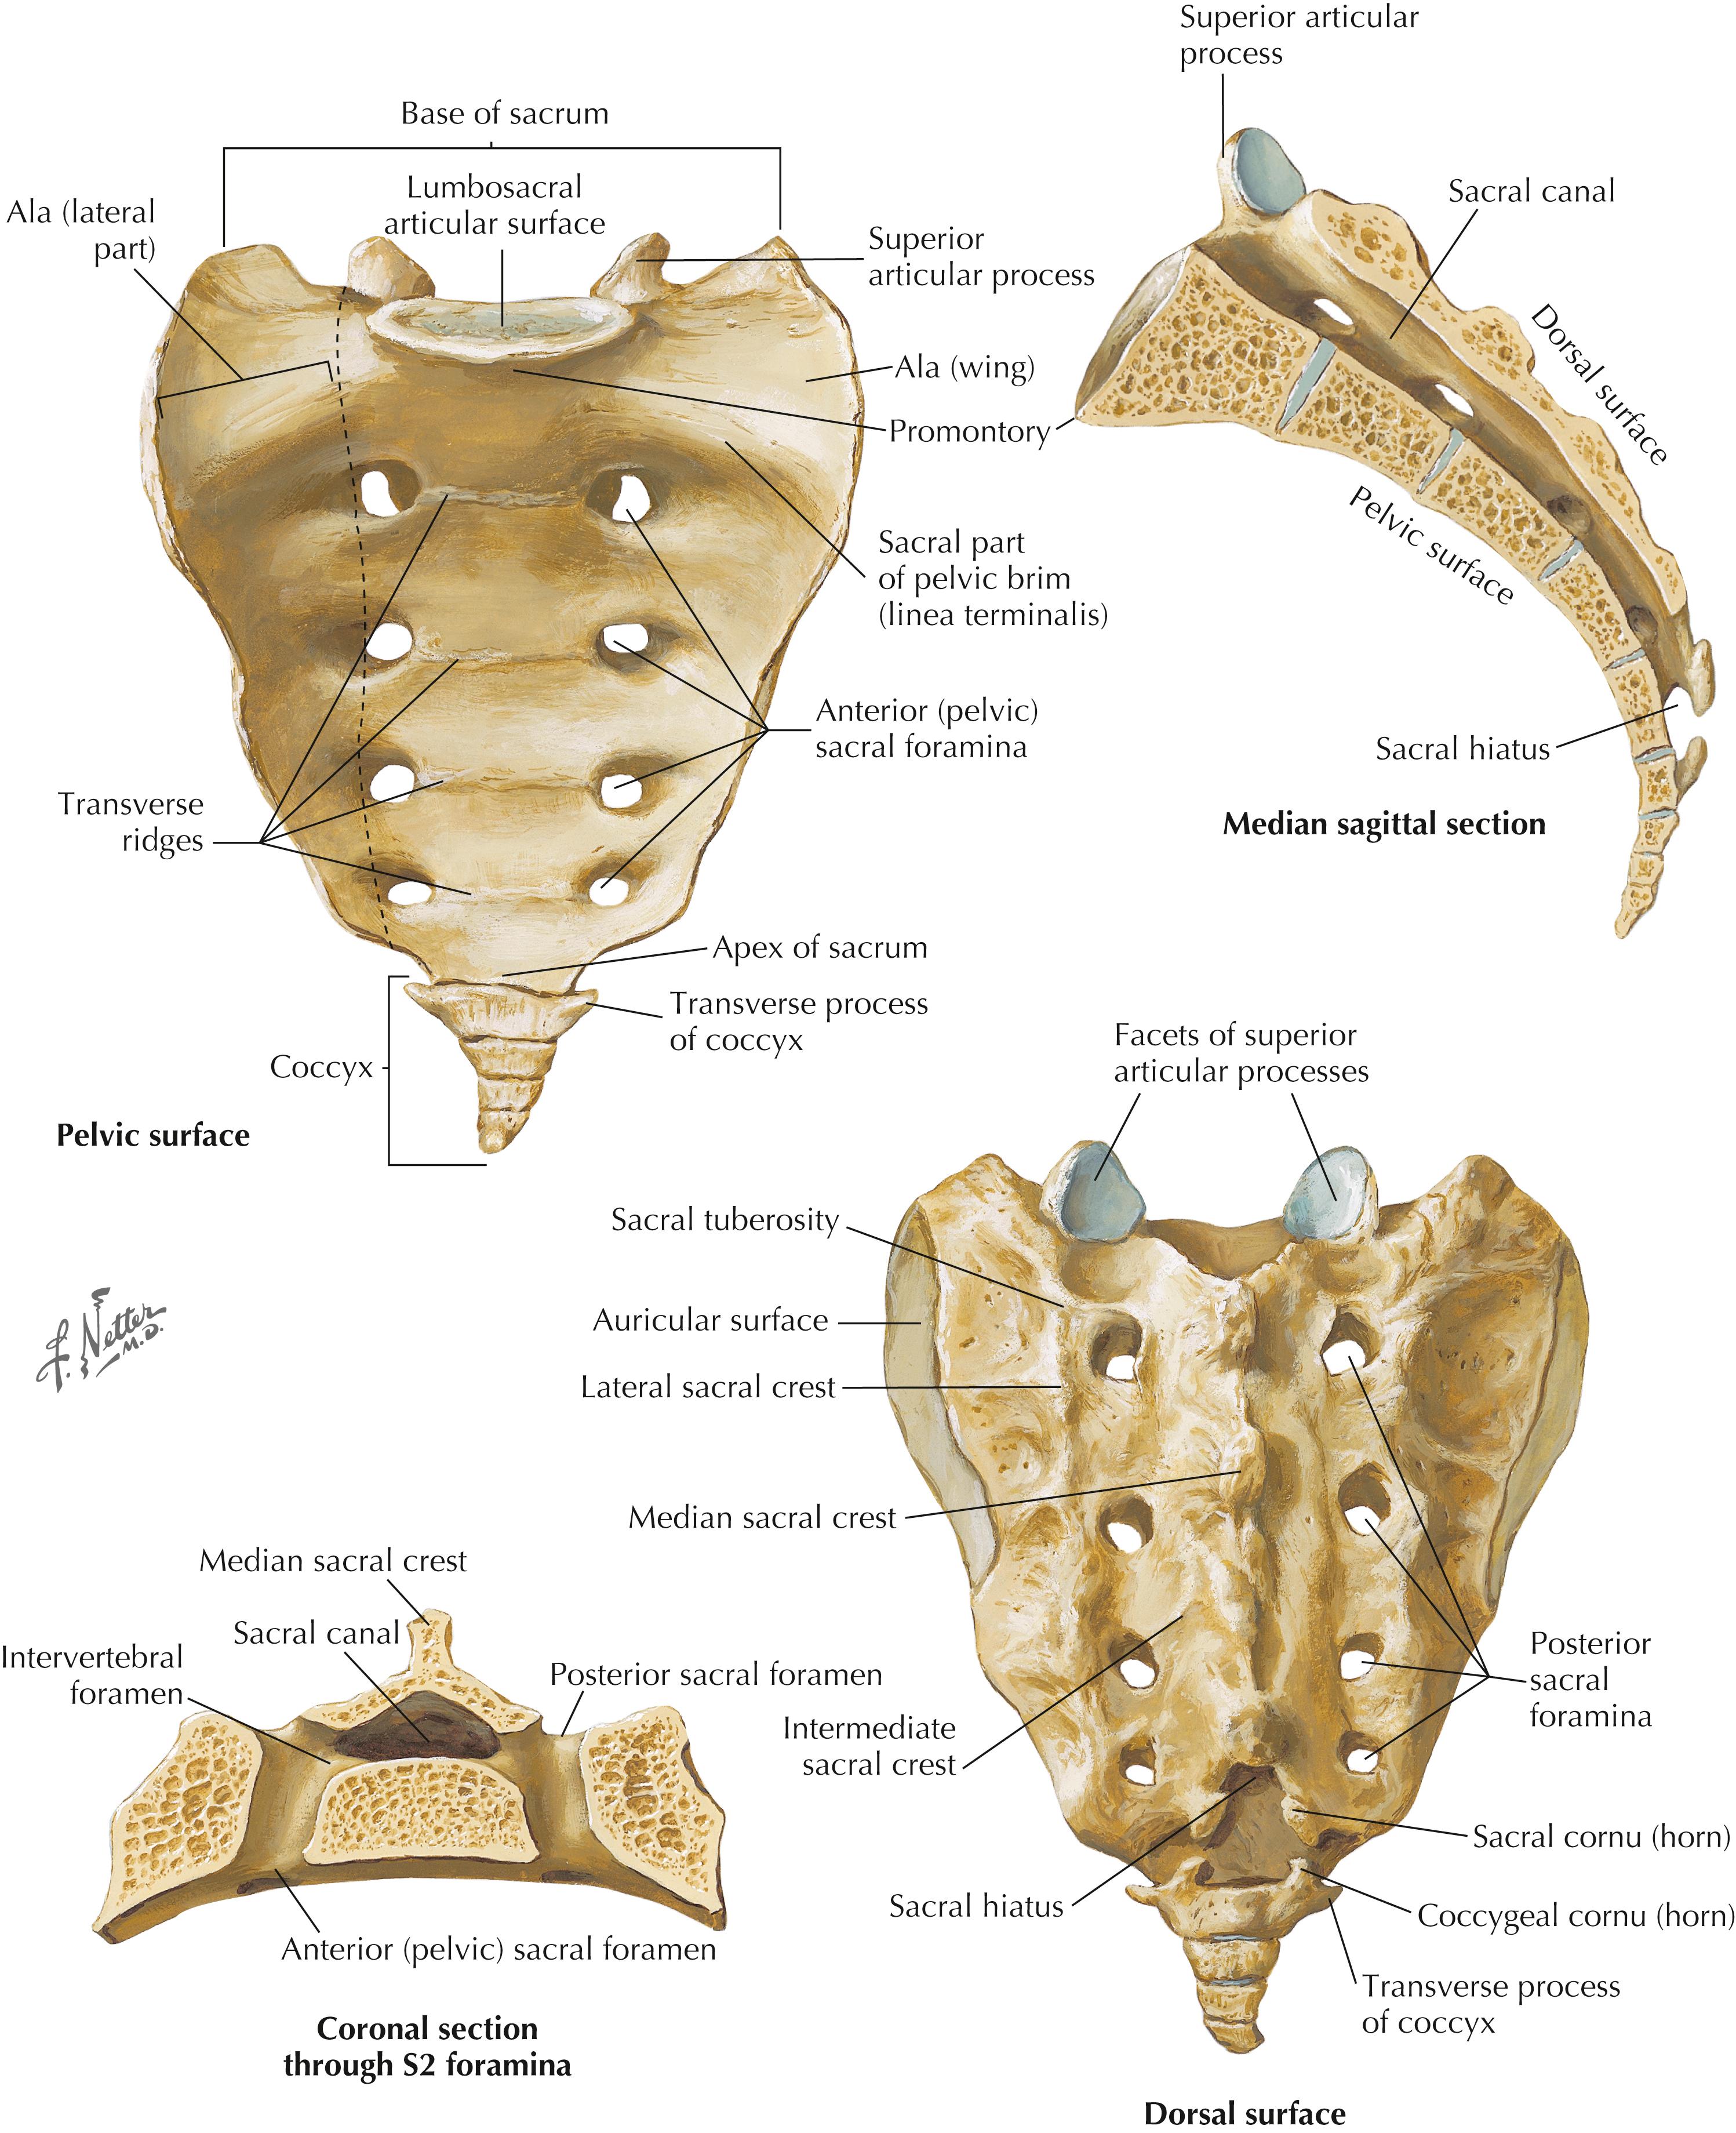 Figure 5-2, Sacrum and coccyx.